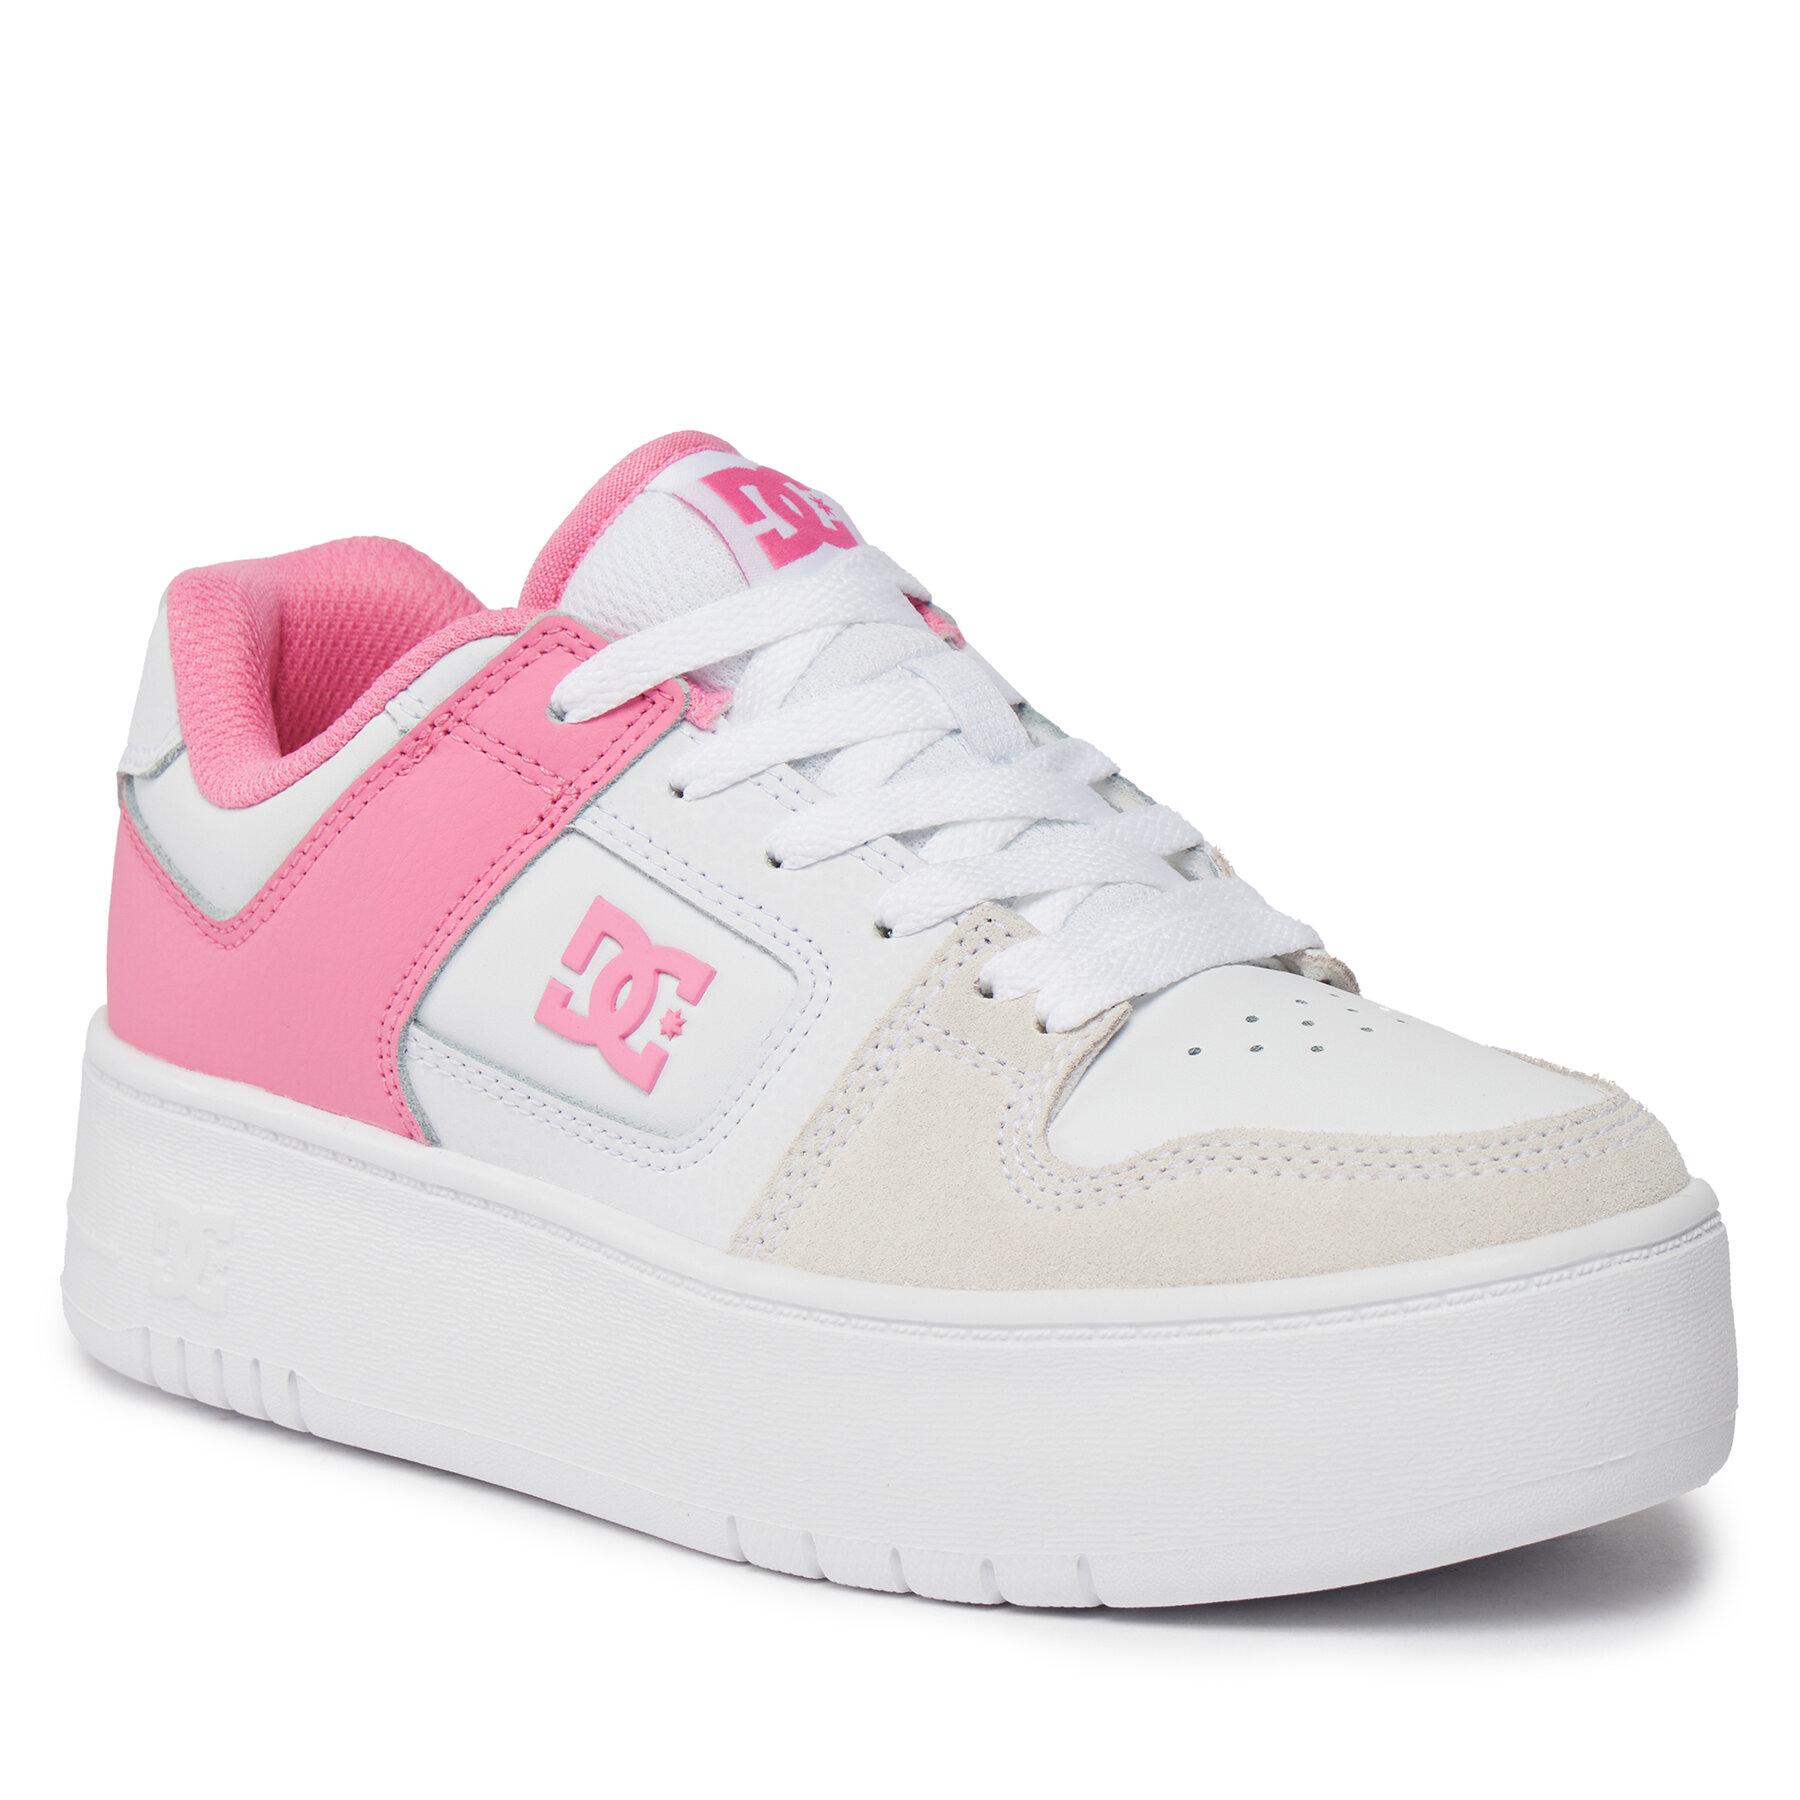 Dc Shoes Manteca4 Pltfrm Rose Pink White Pw0 Chaussures Femme vue2